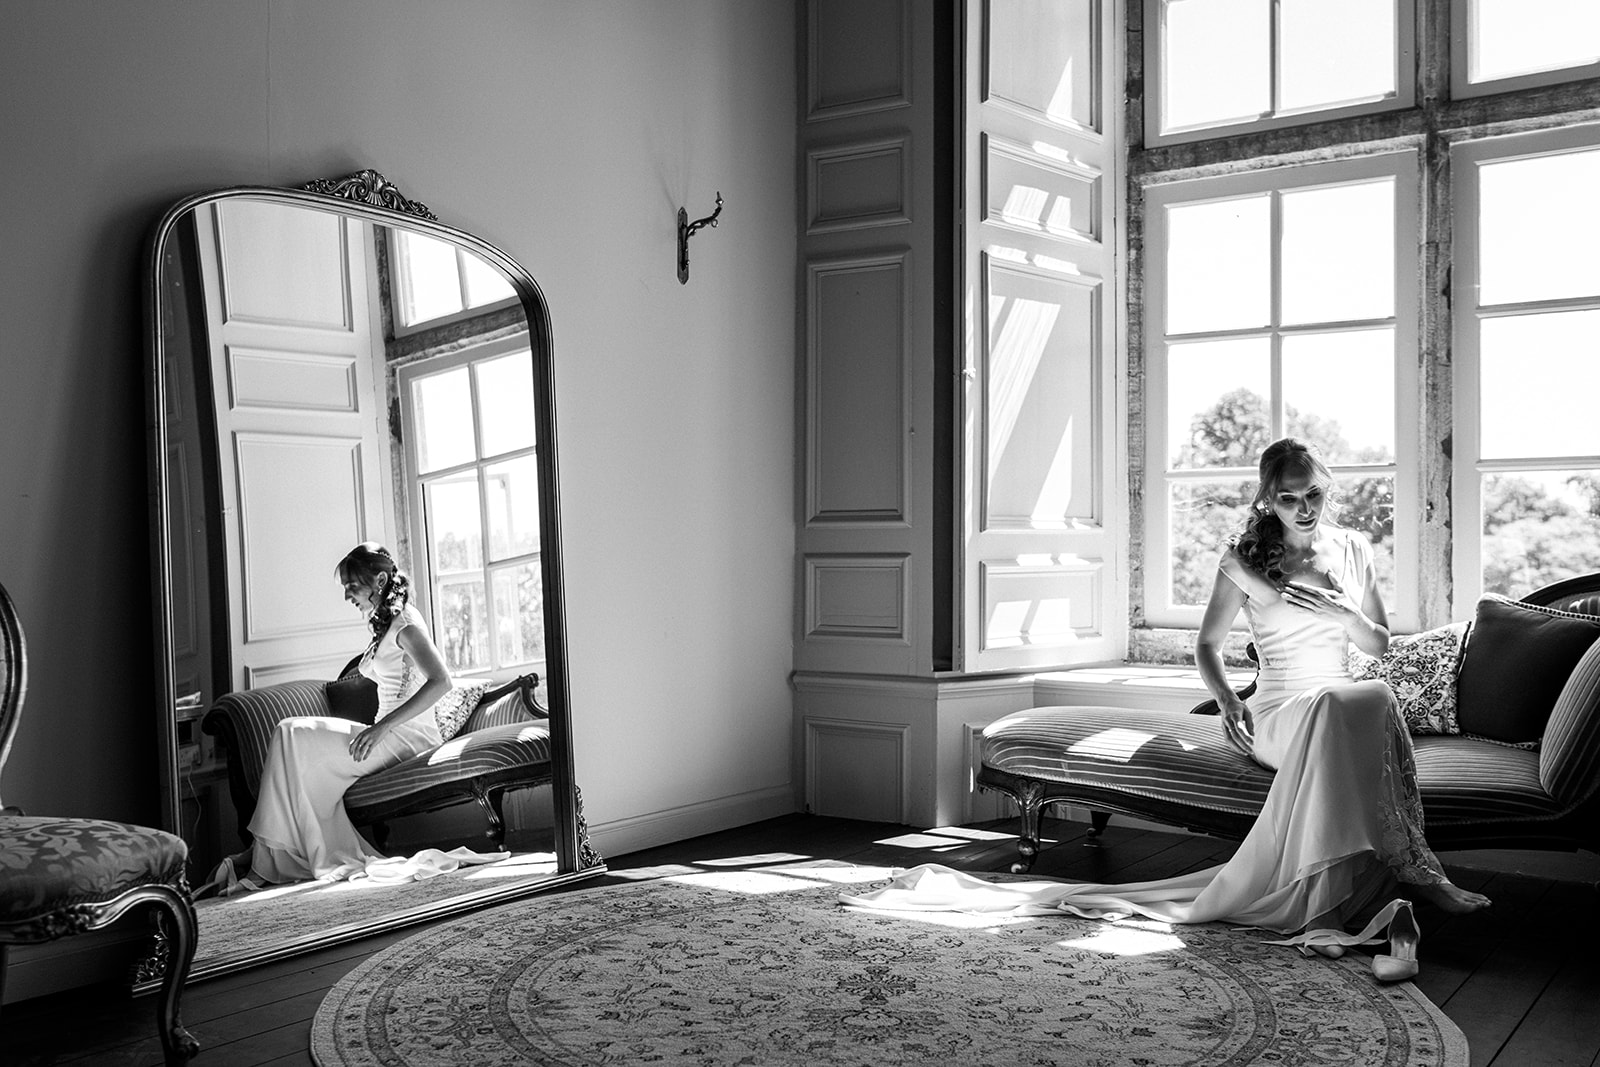 The bride putting on her shoes in the stunning bridal suite